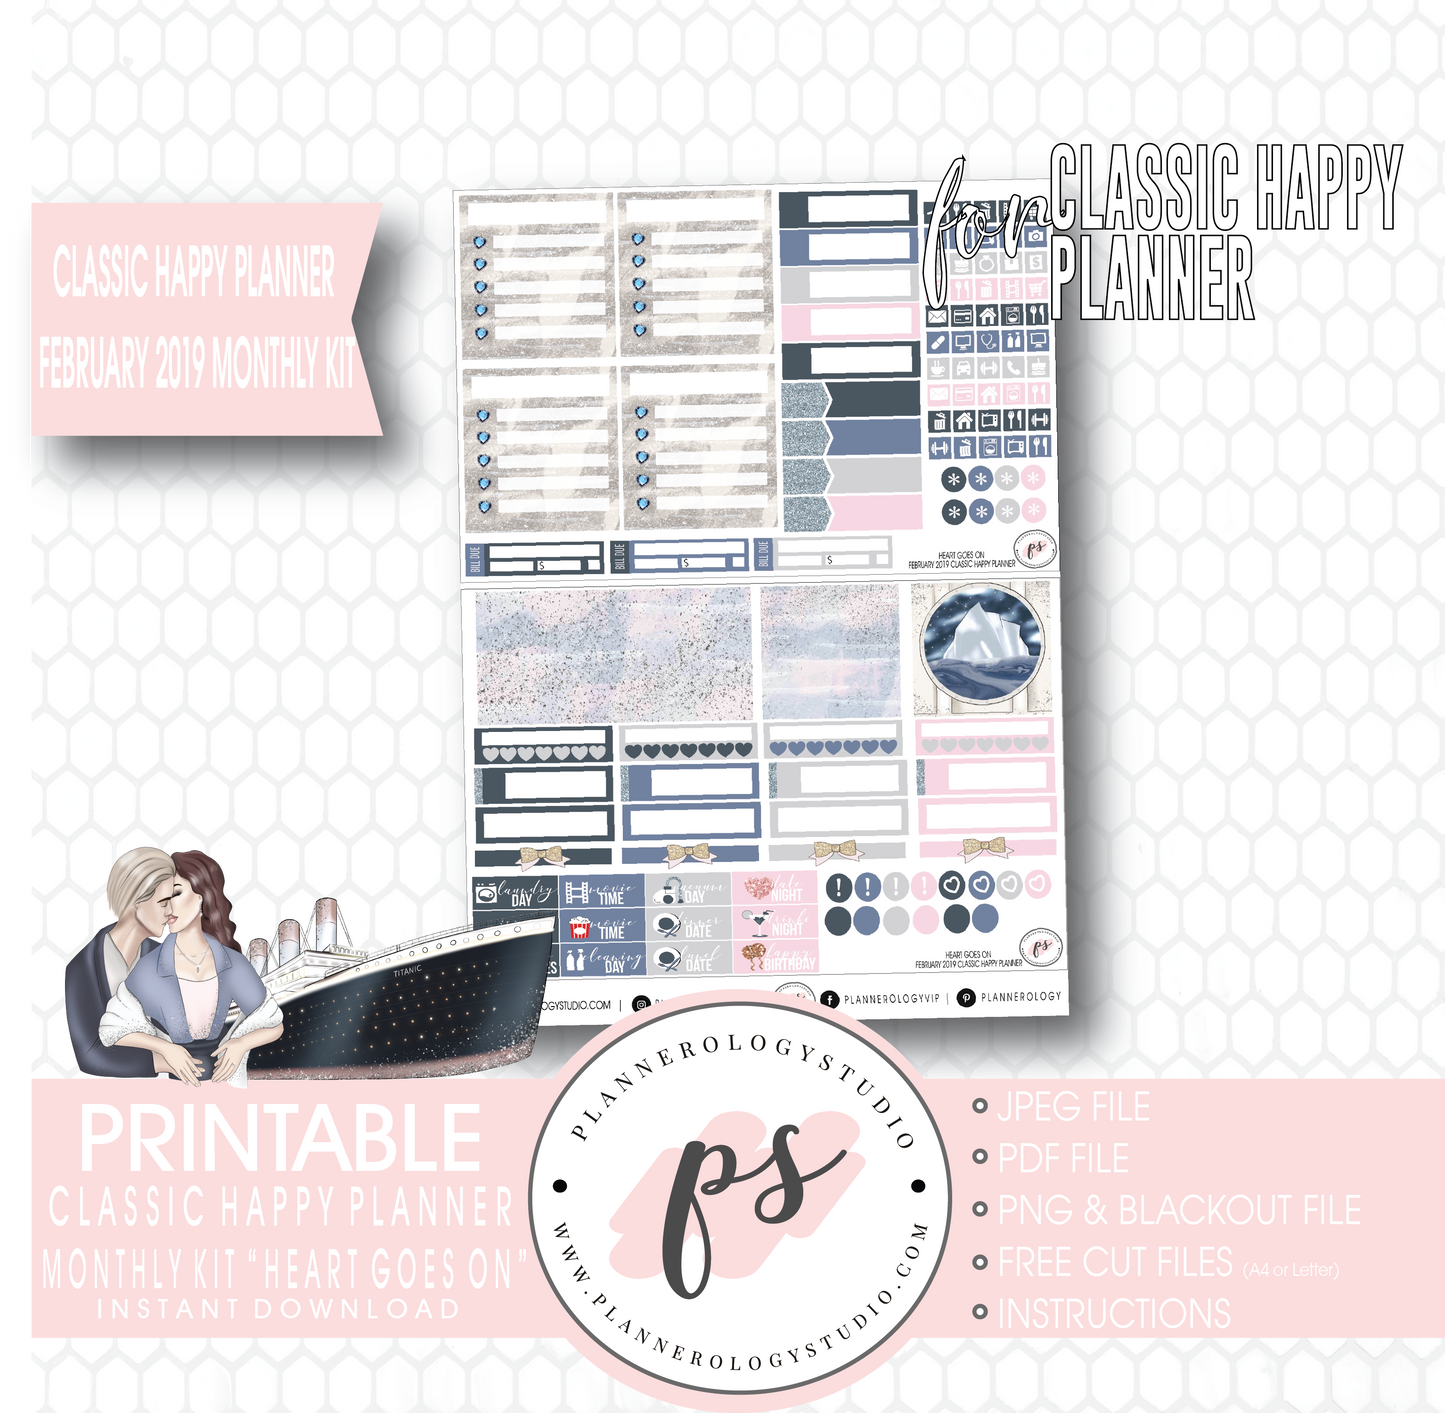 Heart Goes On (Titanic) February 2019 Monthly View Kit Digital Printable Planner Stickers (for use with Classic Happy Planner) - Plannerologystudio